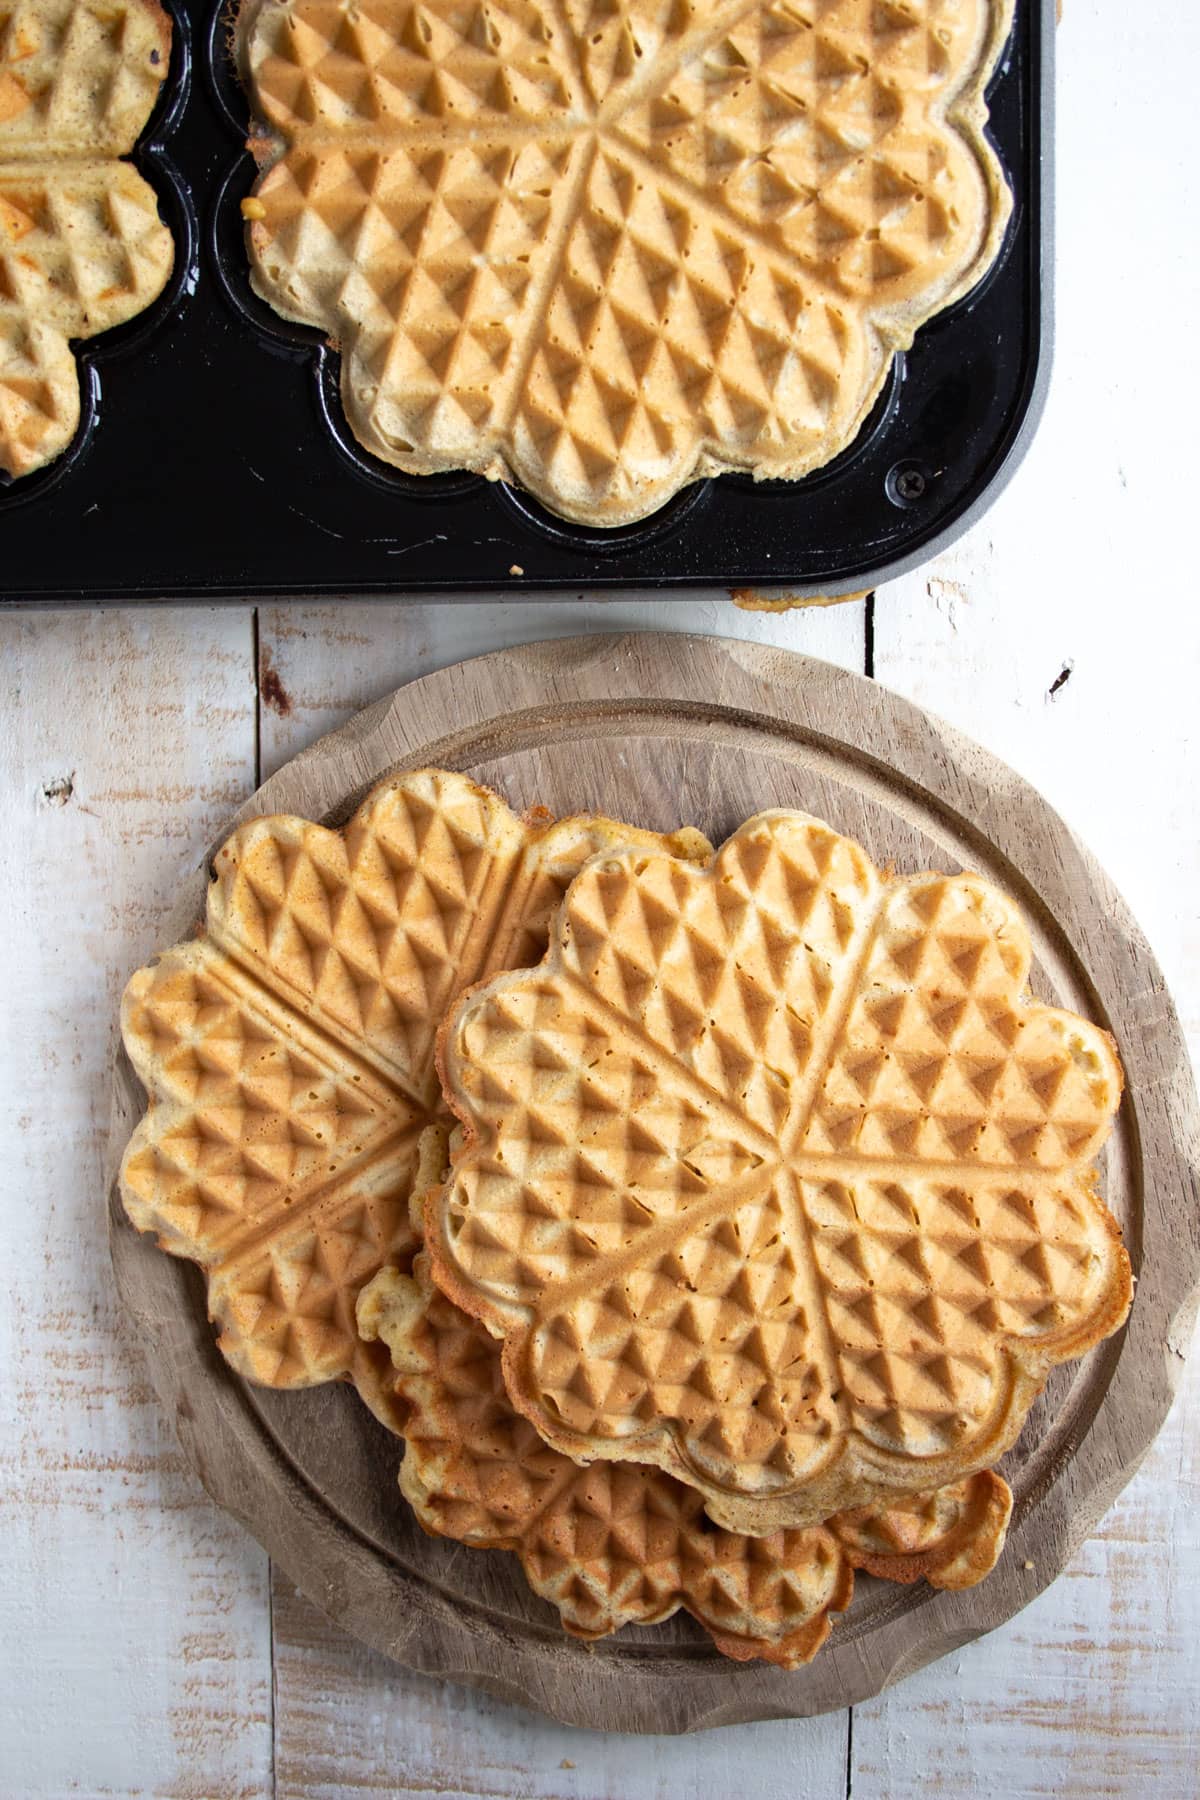 Waffles on a wooden board and waffles in a waffle maker.